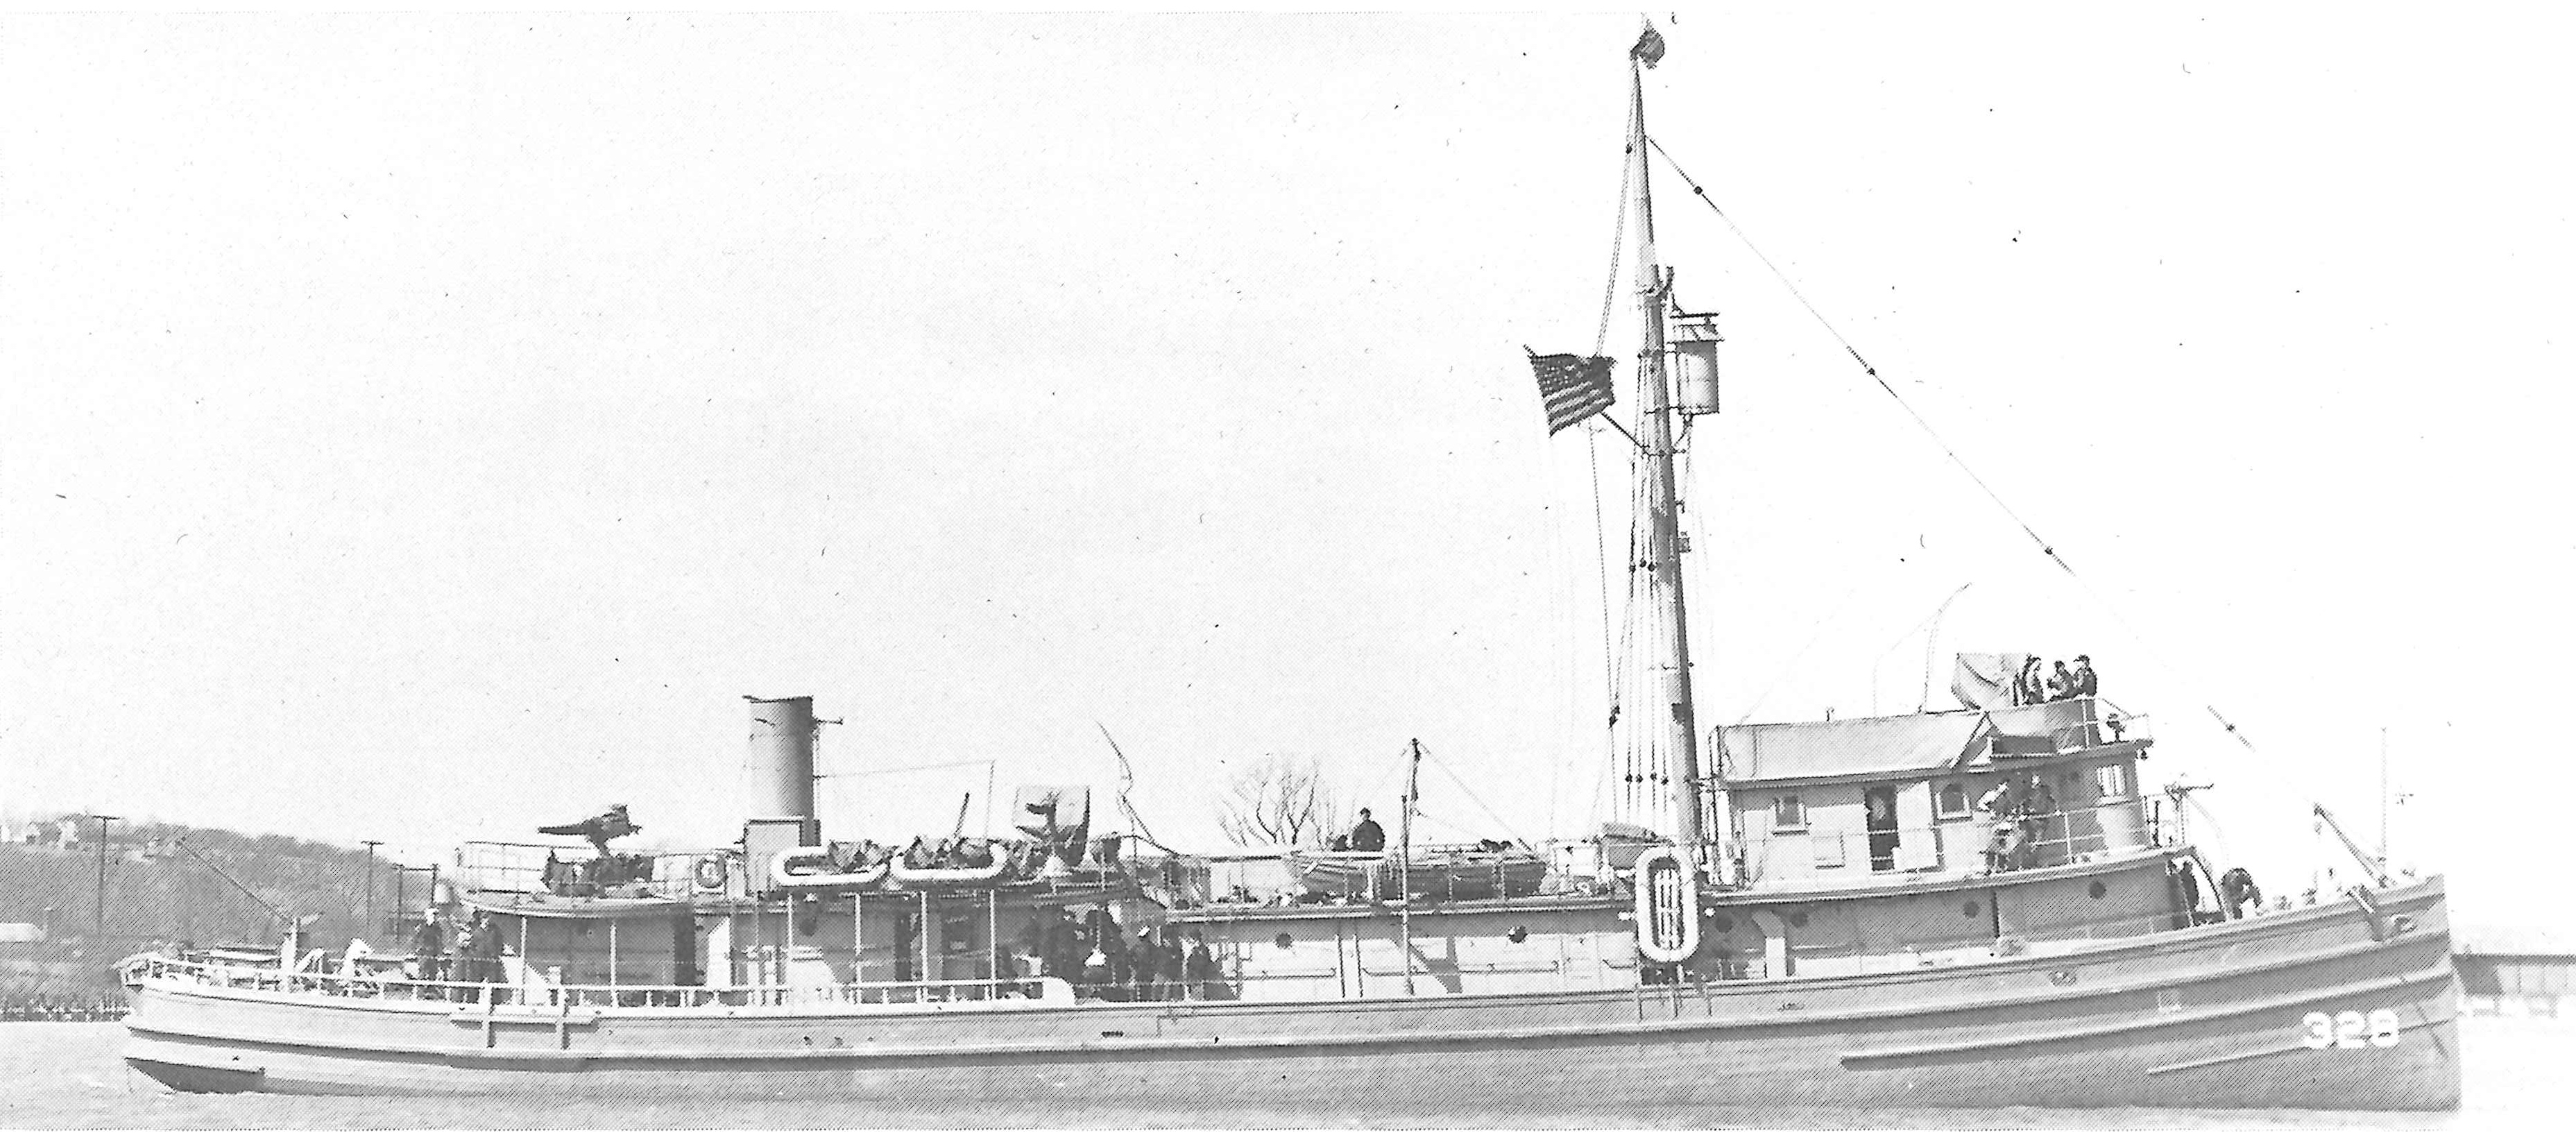 Photo of Wilcox’s sister cutter EM Rowe complete with mast lookout used for spotting schools of Menhaden during its former career. (U.S. Coast Guard)